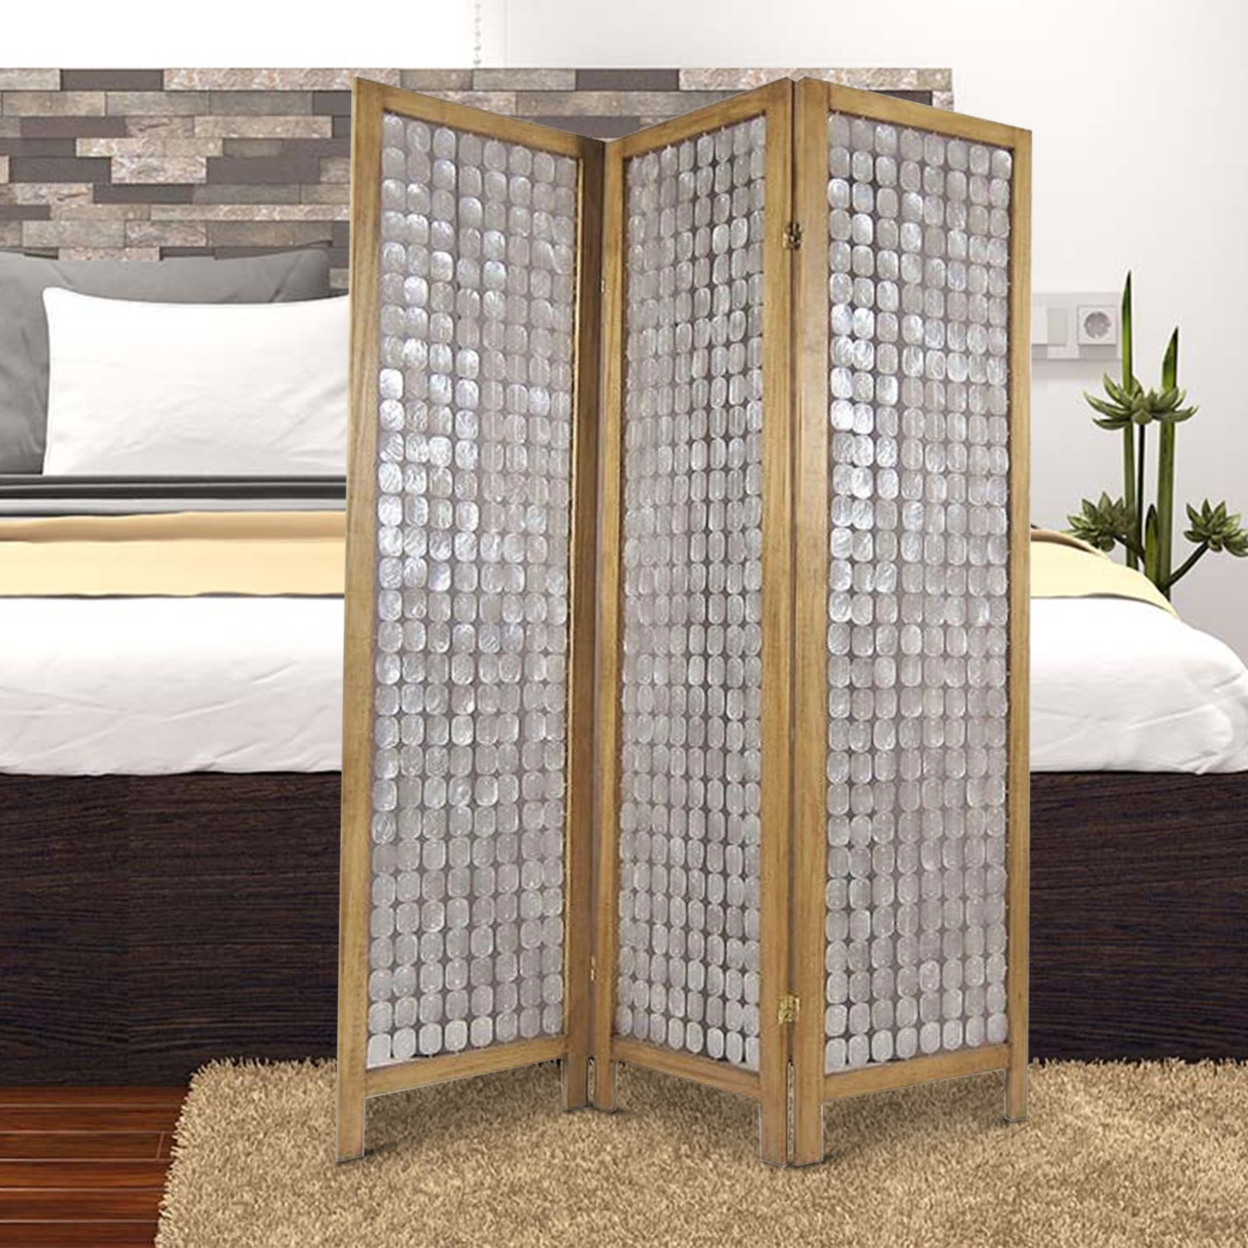 3 Panel Wooden Screen With Pearl Motif Accent, Brown And Silver- Saltoro Sherpi